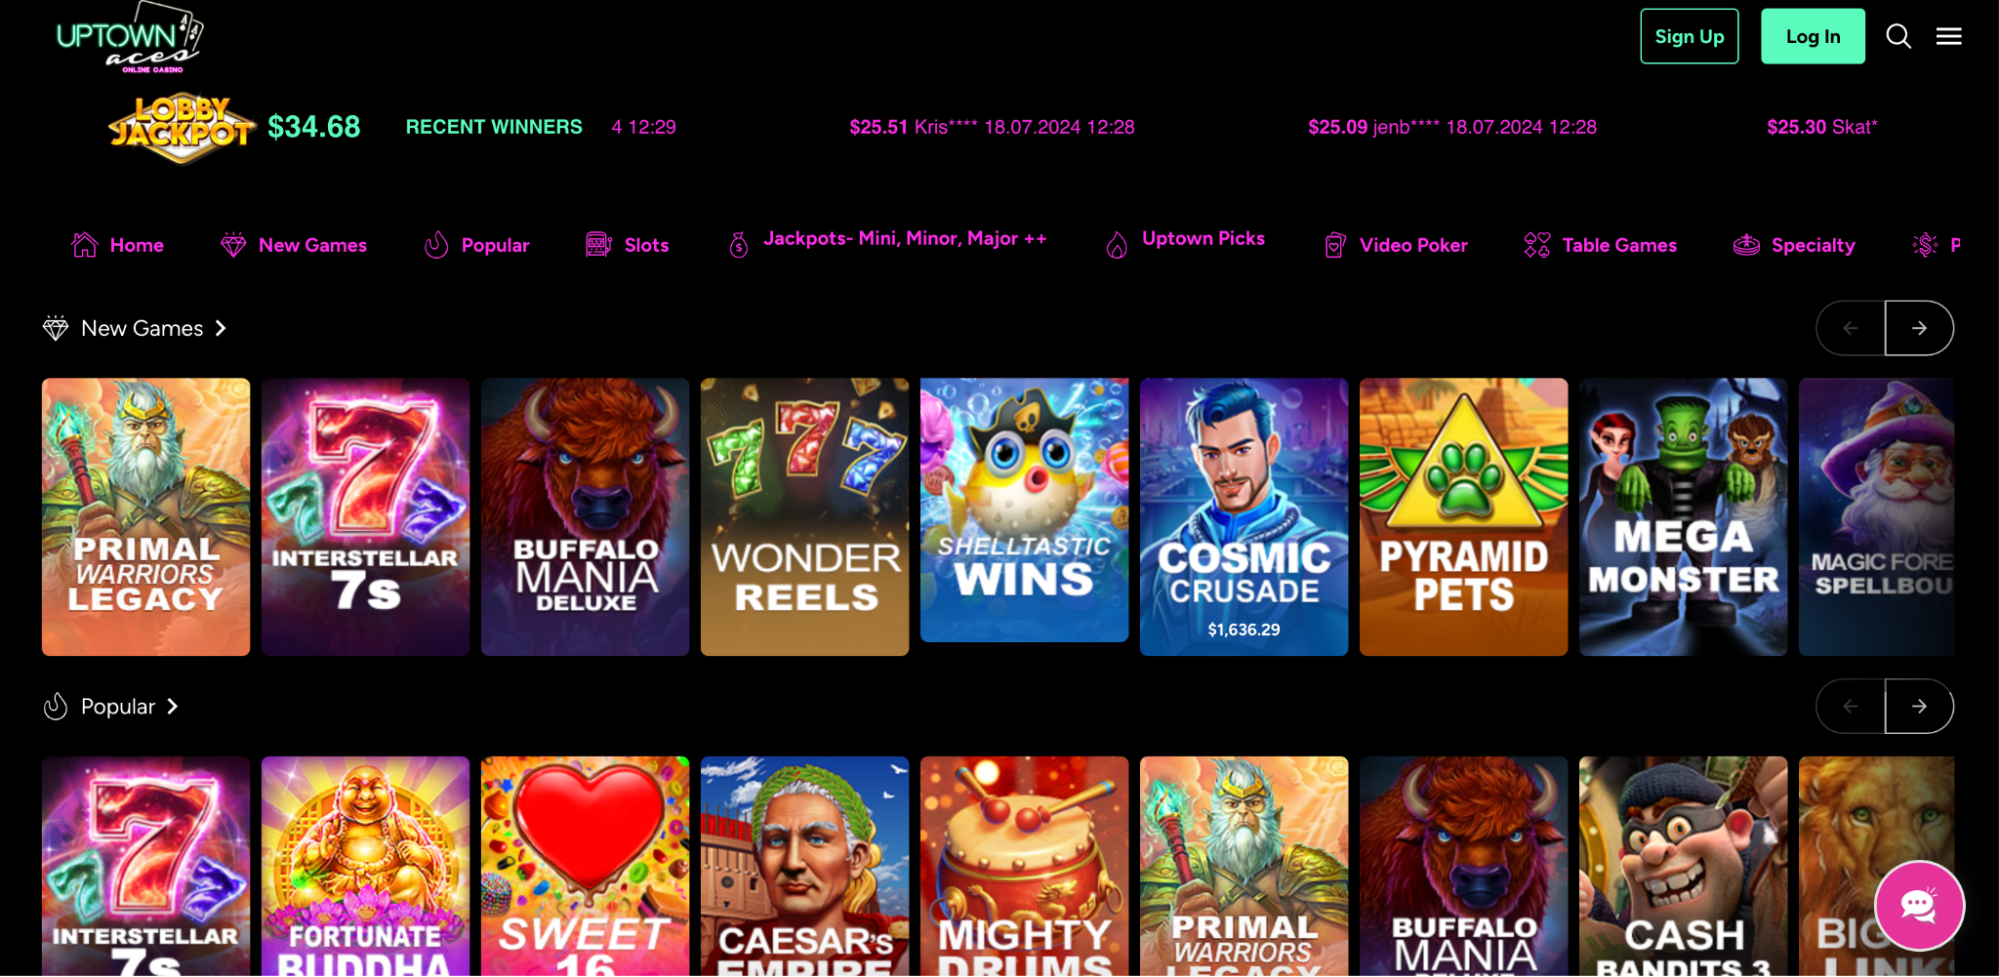 Uptown Aces Casino Review: Welcome Coupon Code $8,888 + 350 Free Spins on First 6 Deposits. How to Get Maximum with Uptown Aces No Deposit Bonus Valid